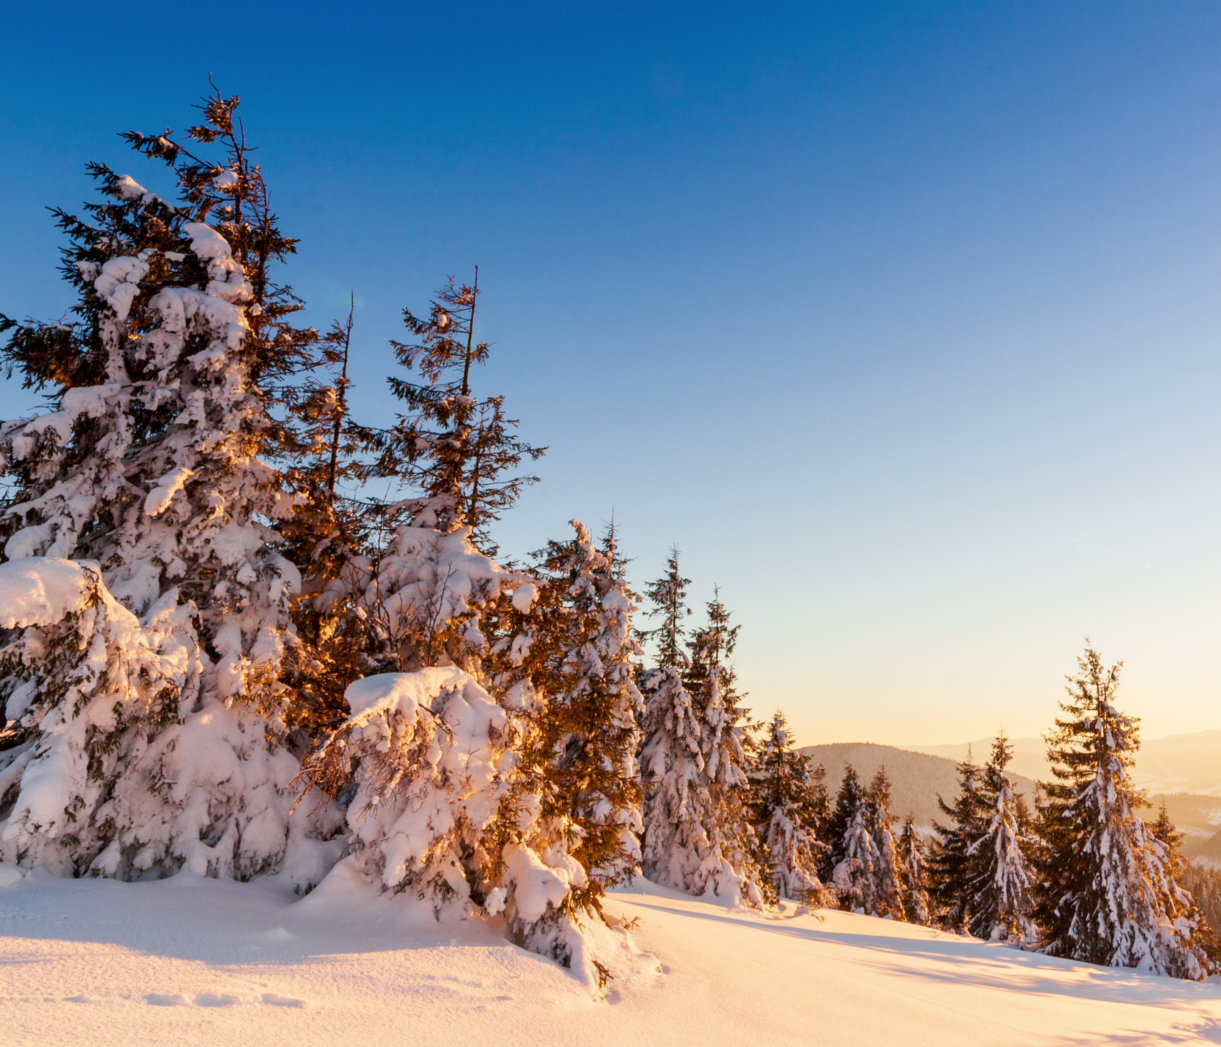 beautiful-winter-landscape-mountains-rising-sun-breaks-through-snow-covered-branches-fir-tree-ground-trees-covered-with-thick-layer-fresh-fluffy-snow.jpg